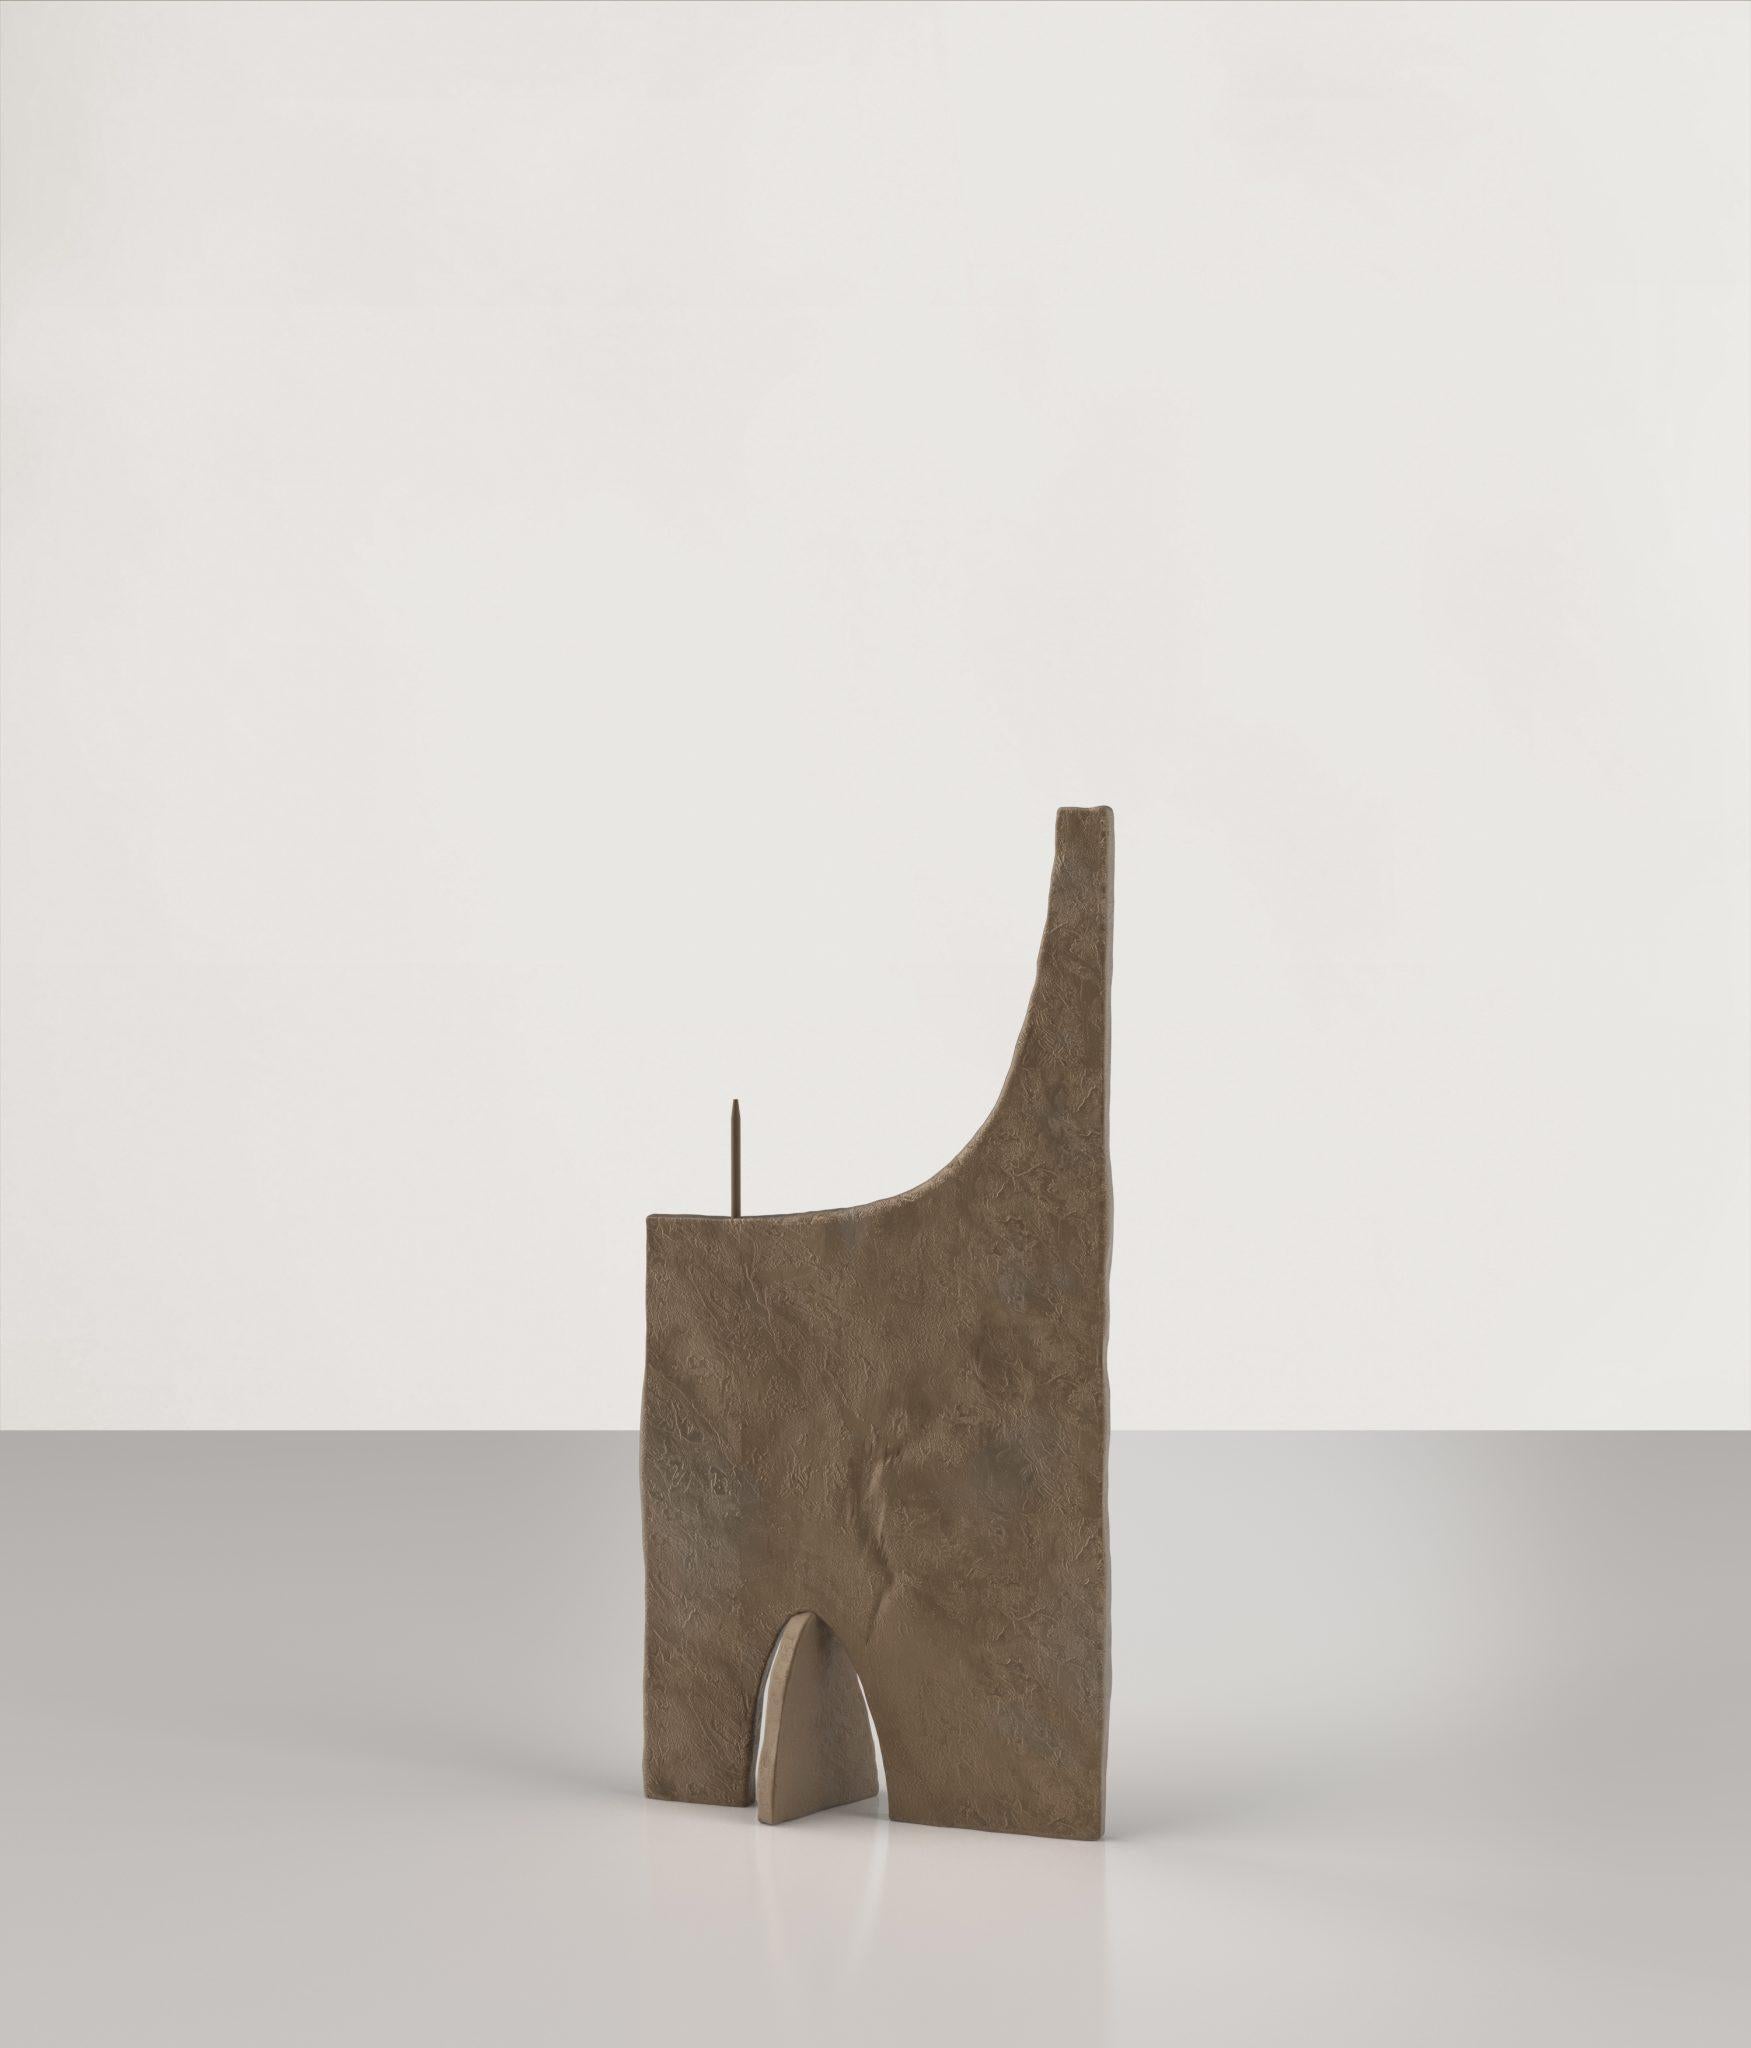 Ouble V2 candleholder by Edizione Limitata
Limited Edition of 15 + 3 pieces. Signed and numbered.
Dimensions: D 3 x W 10 x H 21 cm.
Materials: Cast Bronze.

Edizione Limitata, that is to say “Limited Edition”, is a brand promoting and